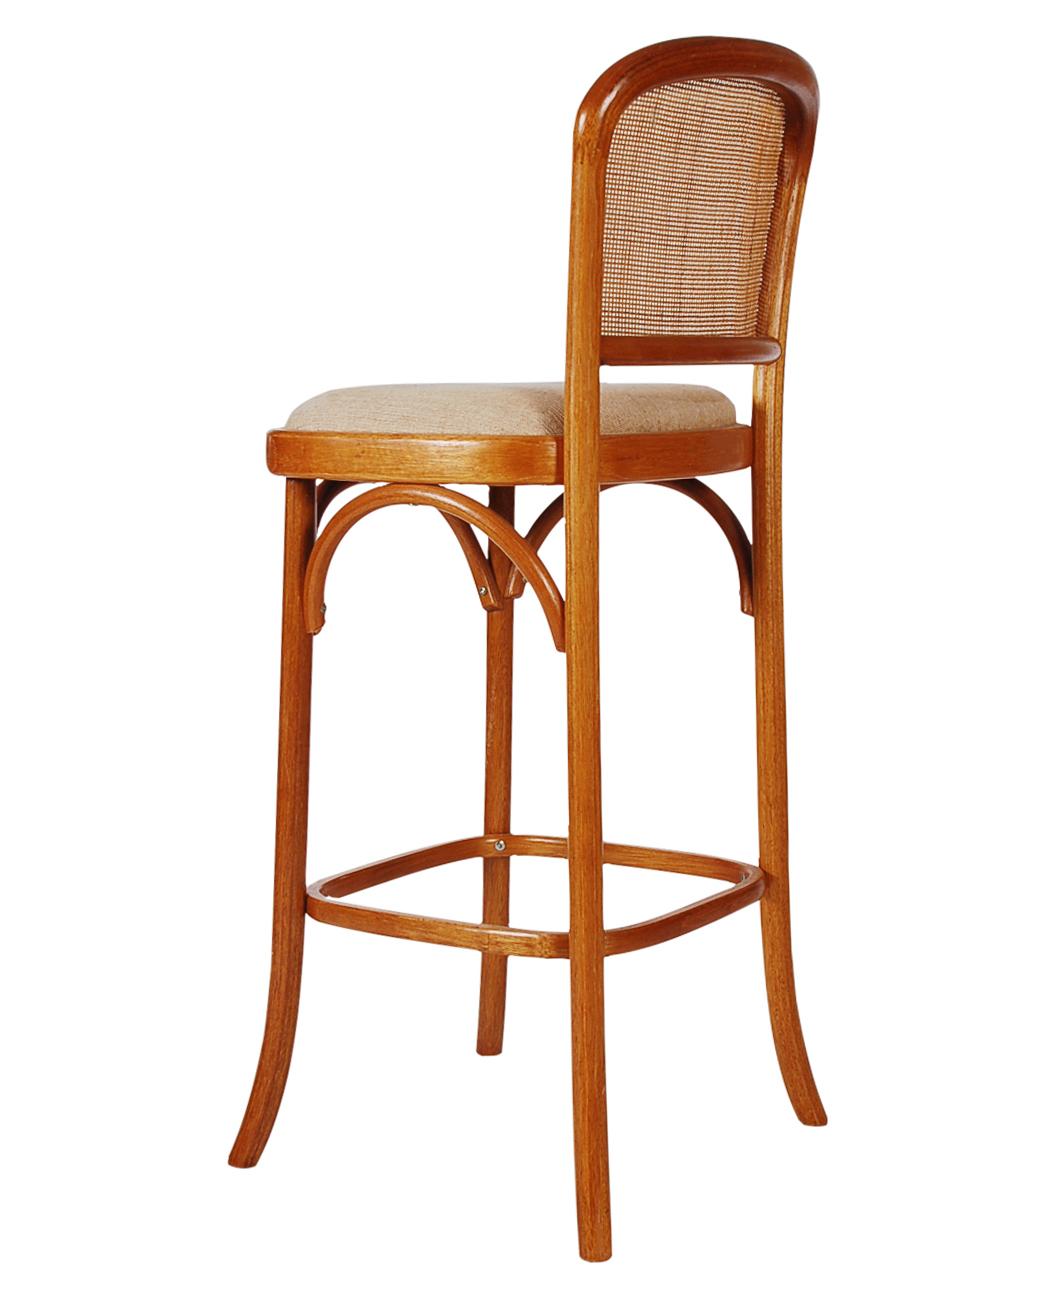 Late 20th Century Set of 4 Mid-Century Modern Cane Back Bar Stools after Le Corbusier for Thonet